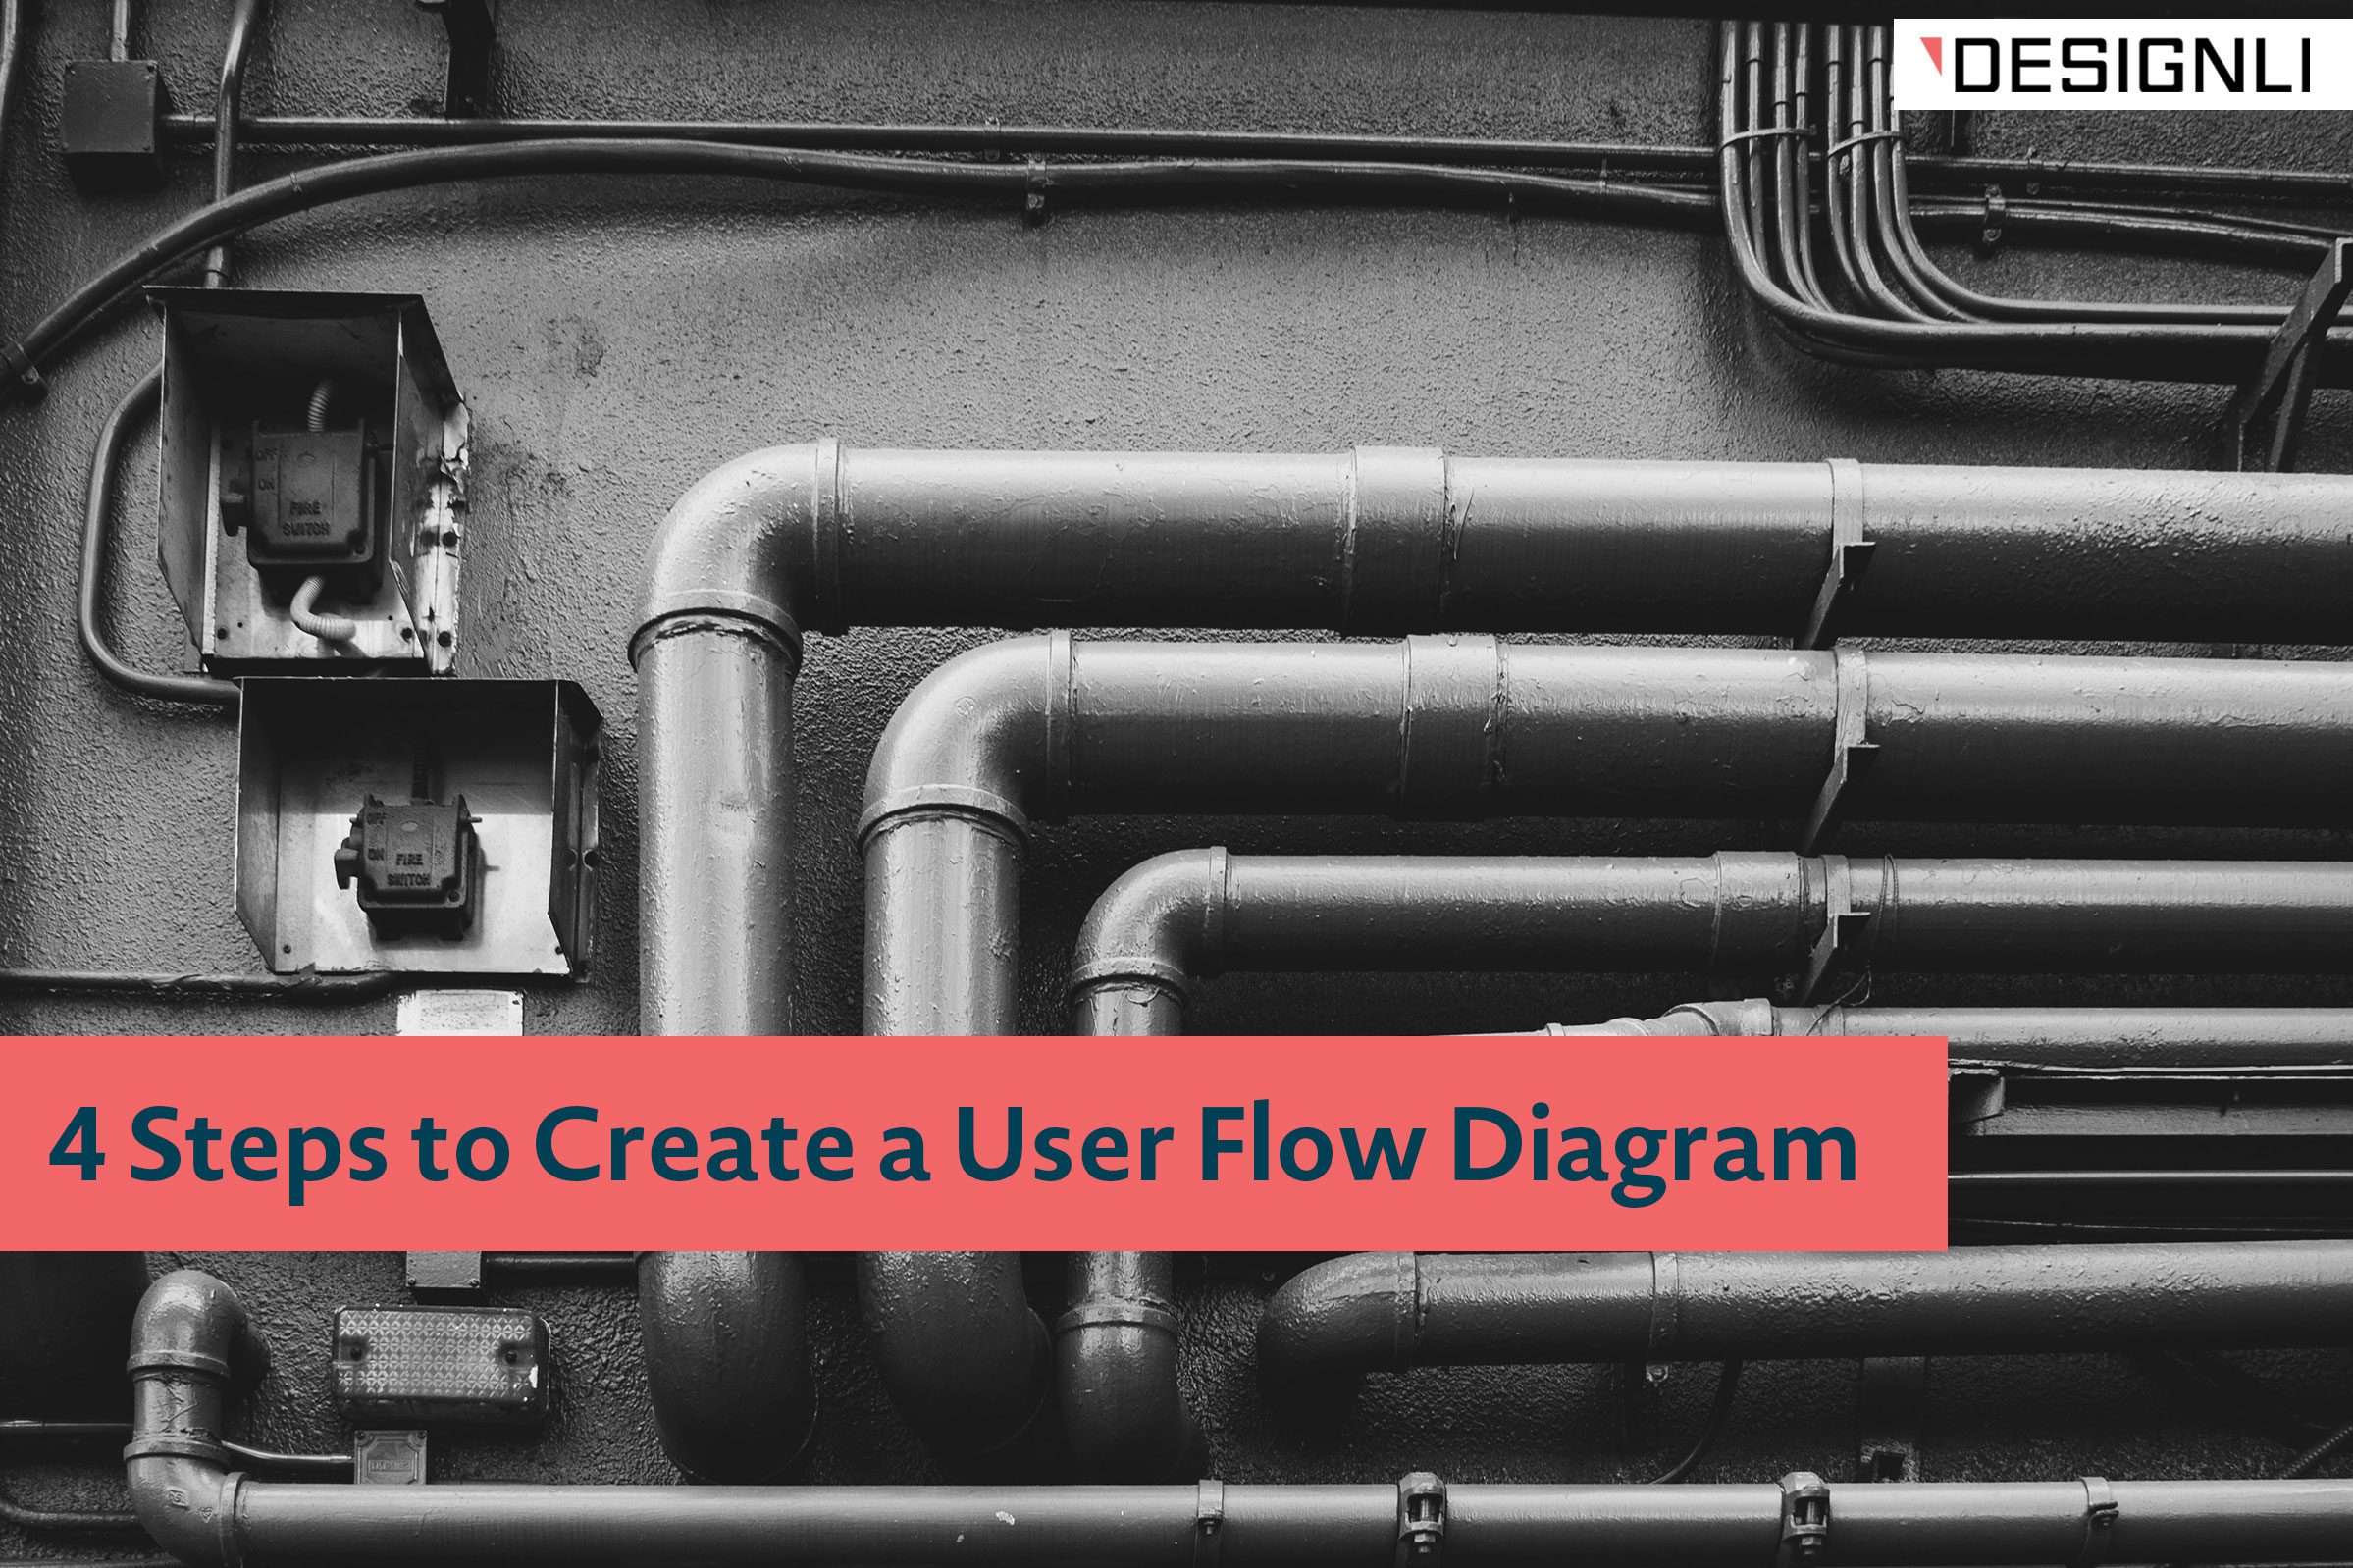 4 Steps to Create a User Flow Diagram